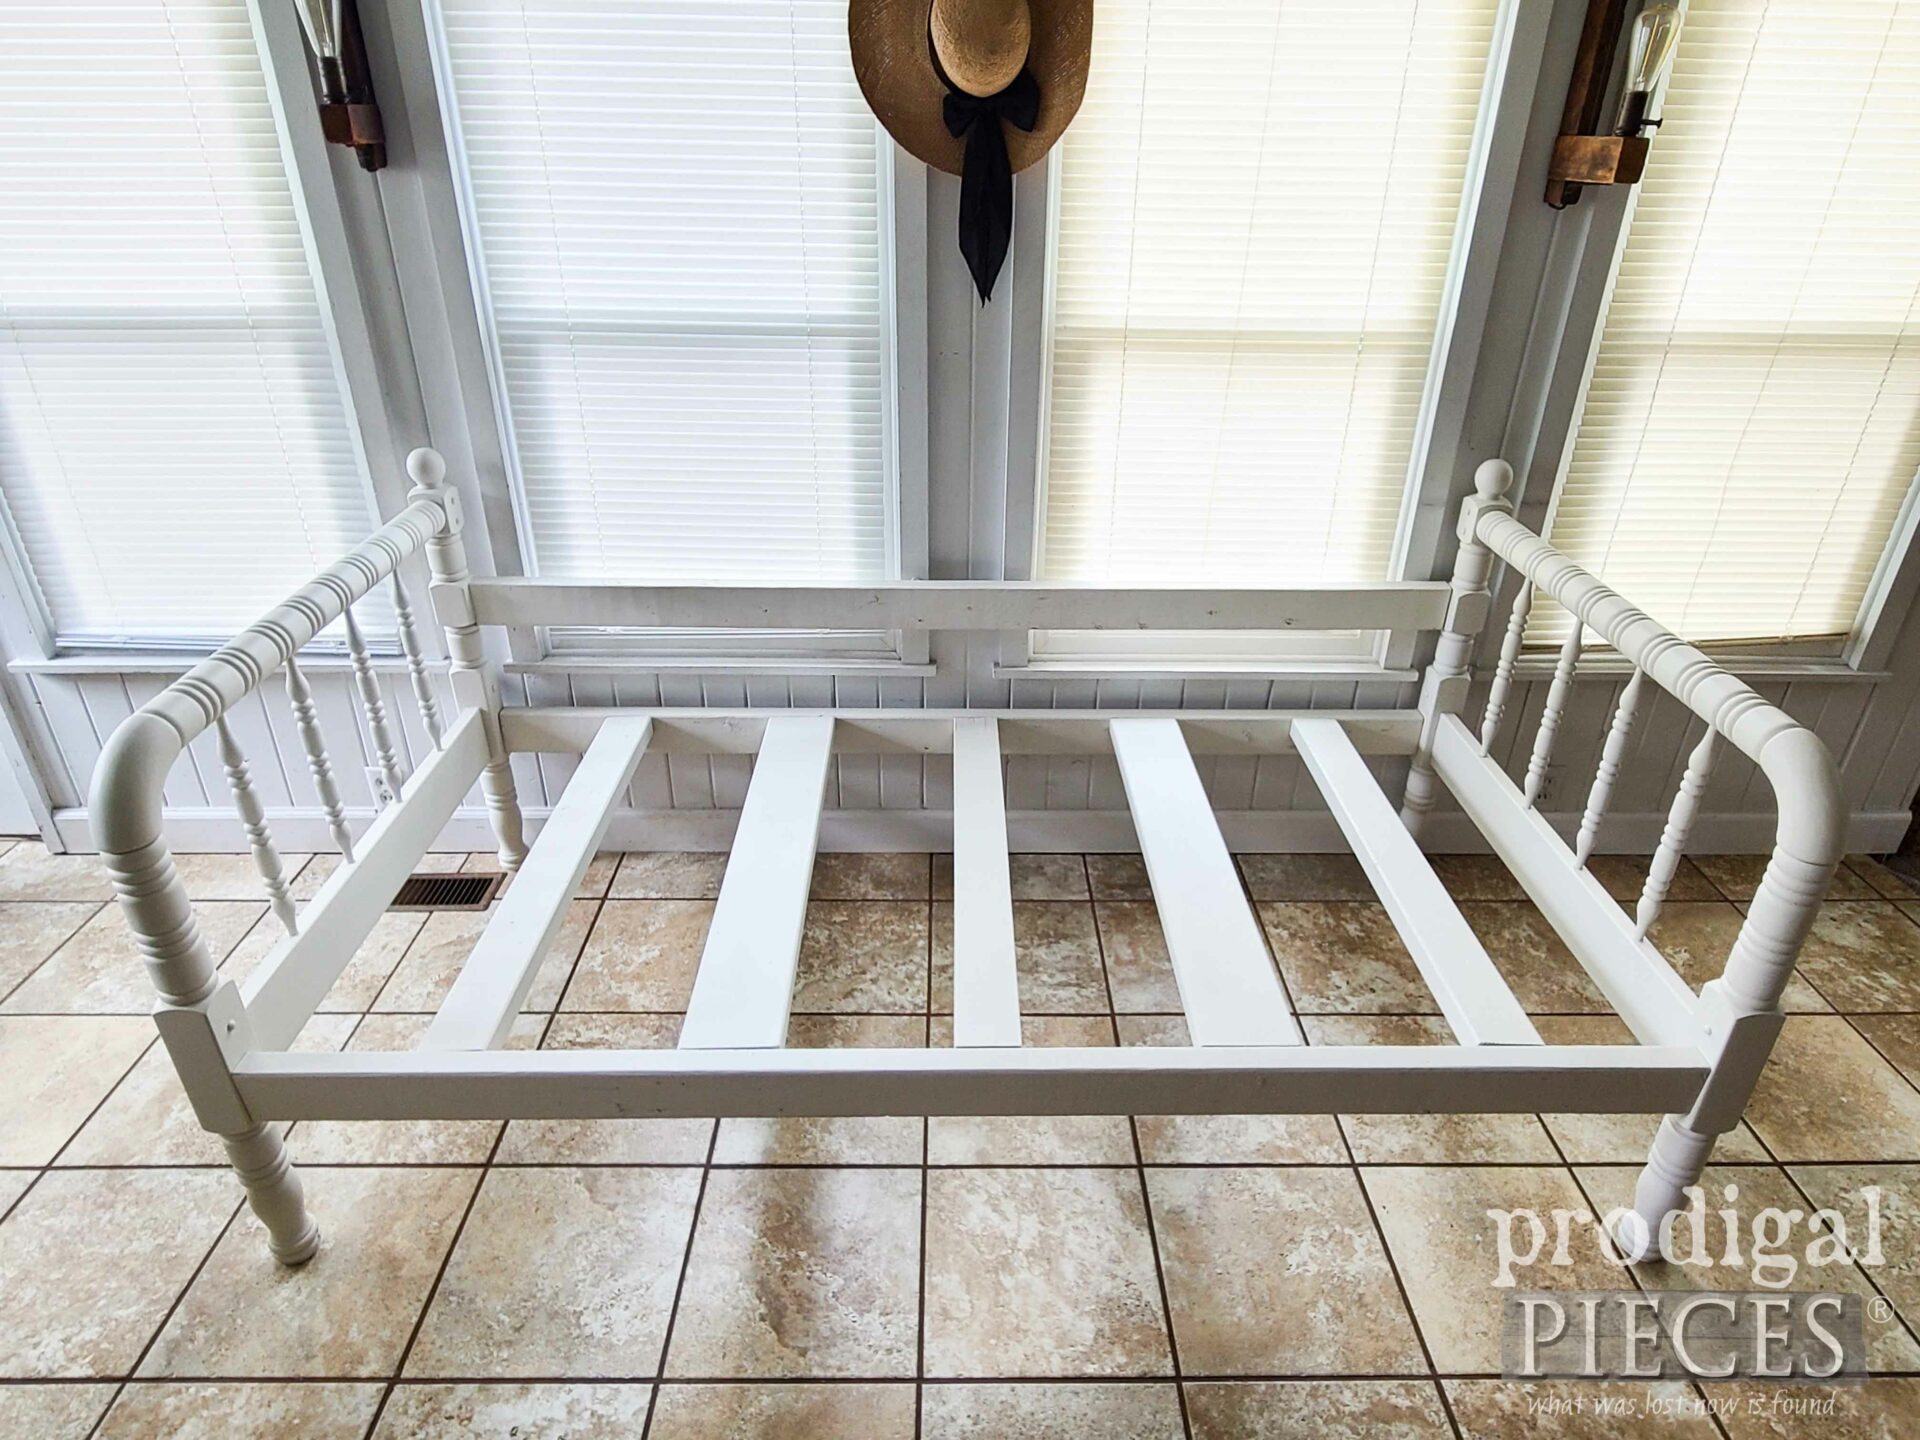 Naked Daybed Frame Built from Reclaimed Wood and Upcycled Bed Frame by Larissa of Prodigal Pieces | prodigalpieces.com #prodigalpieces #buildit #diy #bed